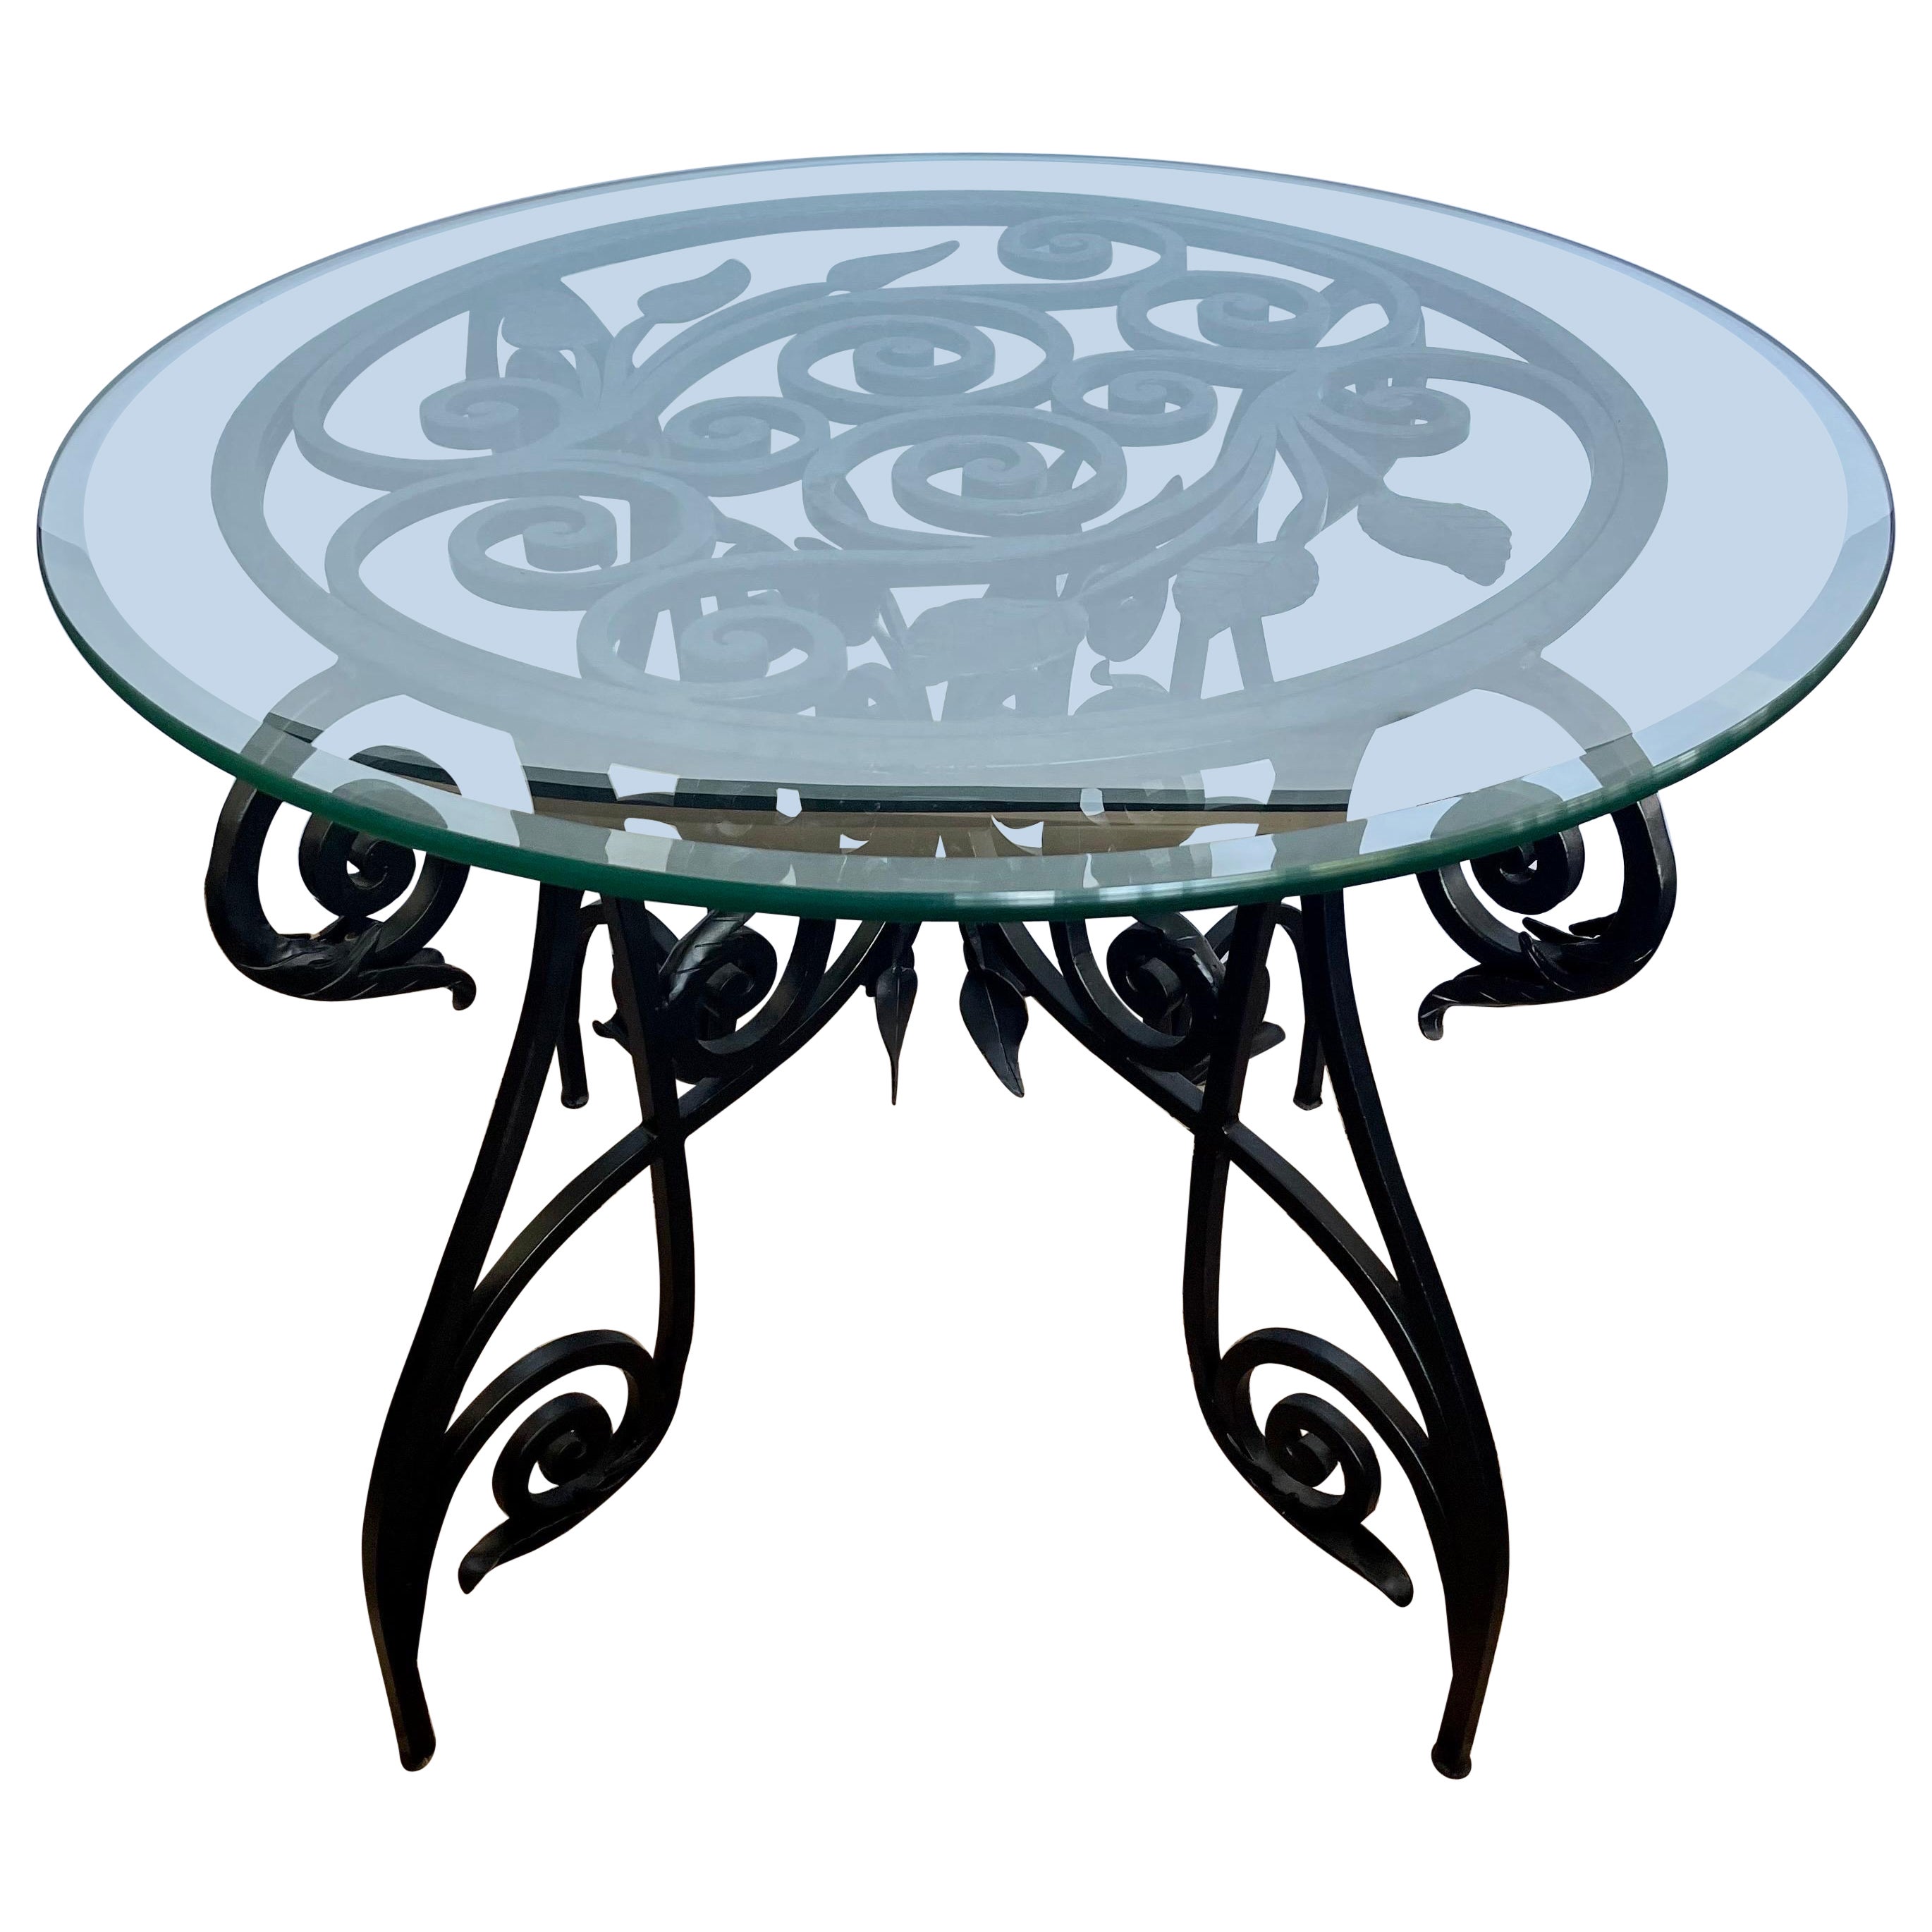 Maison Jansen Organic French Iron and Glass Sculptured Center Foyer Table For Sale